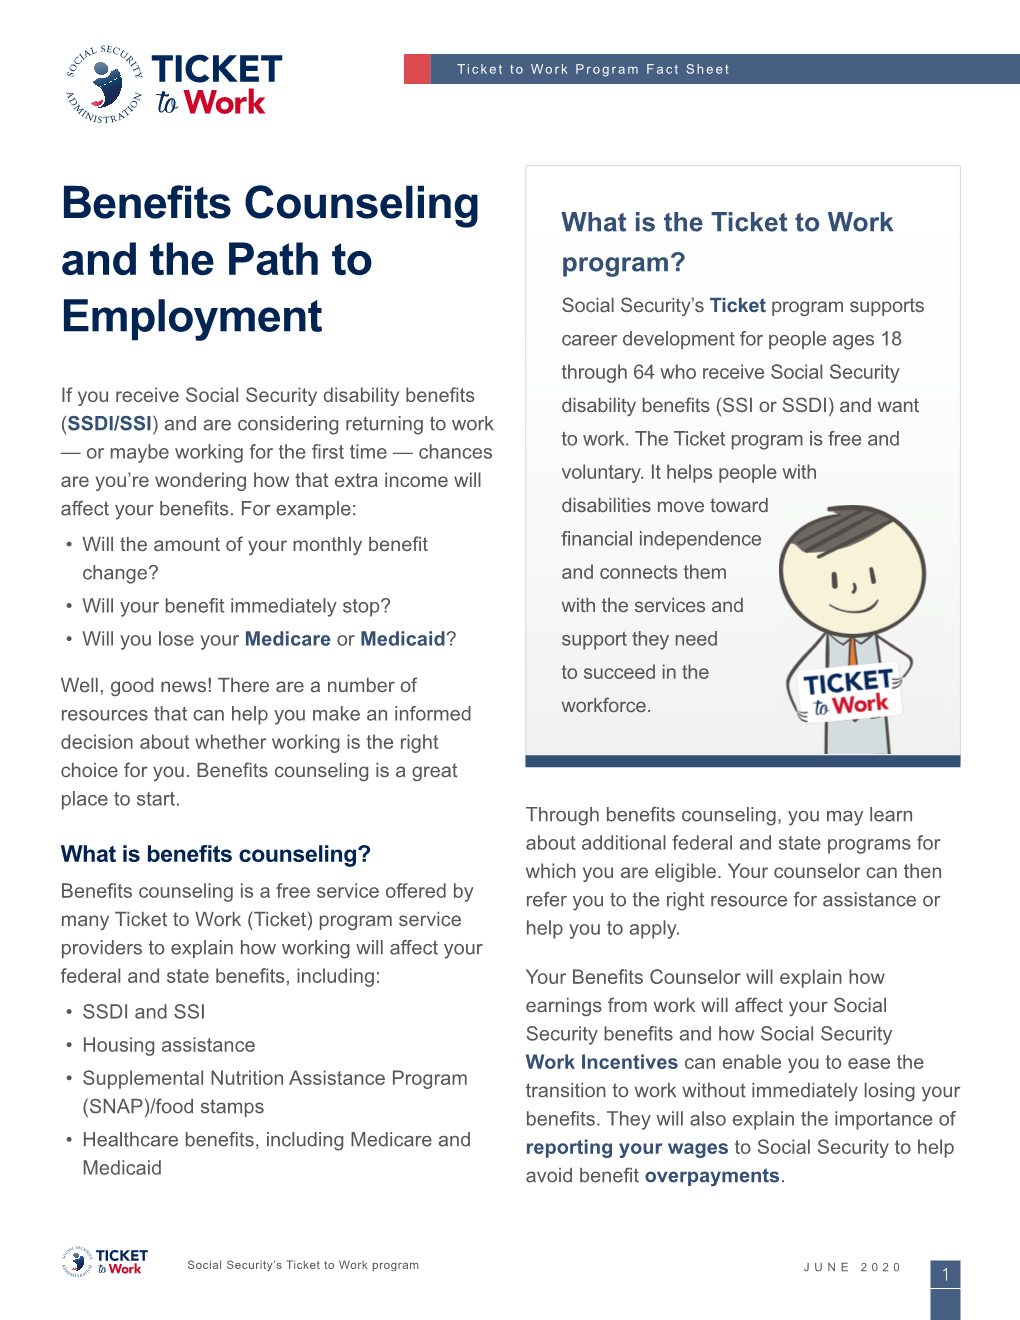 Benefits Counseling and the Path to Employment